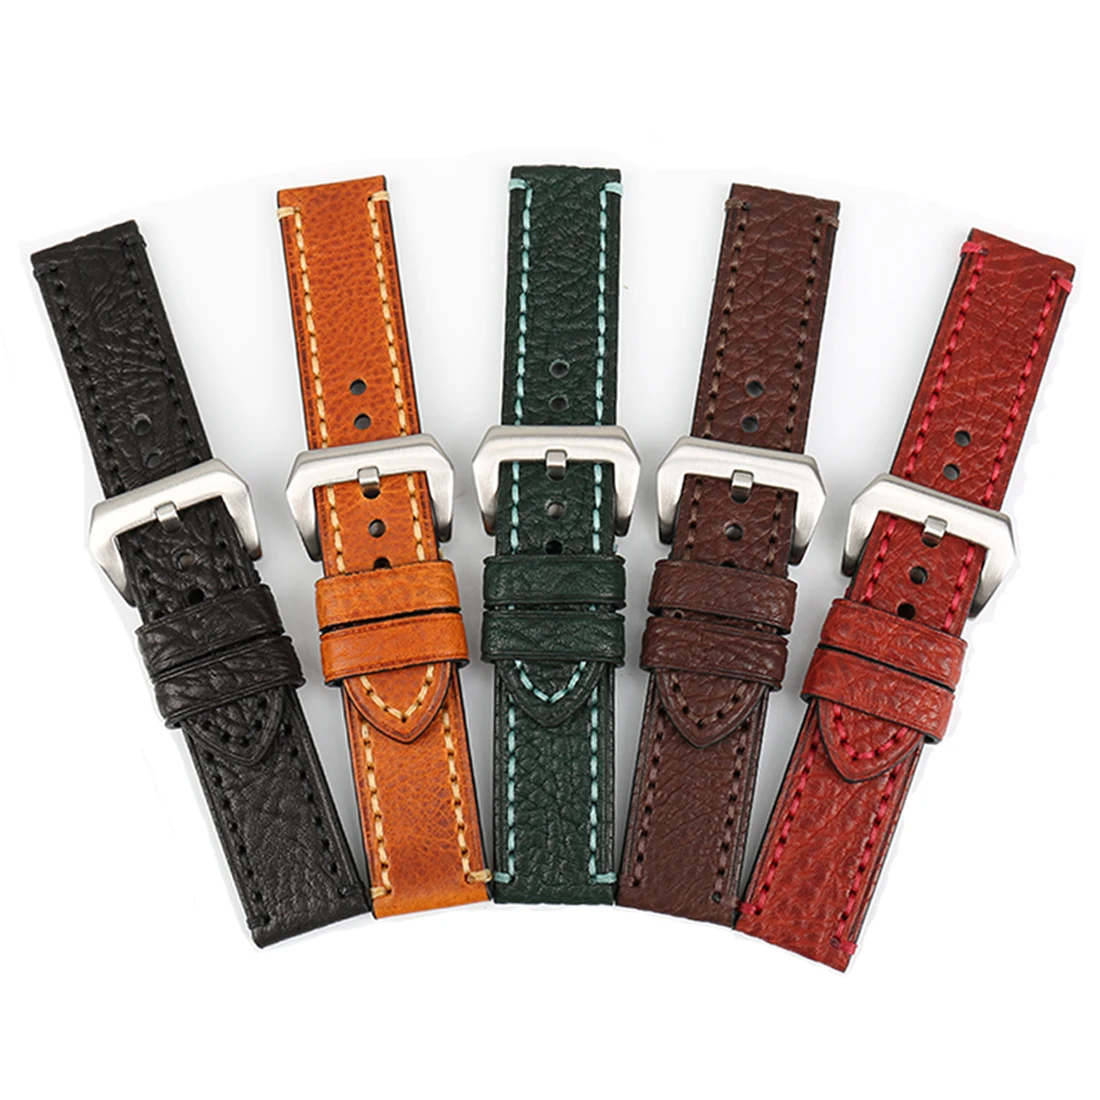 

MAIKES High-grade Handmade Thick Line Cow Leather Watch Band 20mm 22mm 24mm 26mm Amazon Hot Selling Watch Straps for Men Women, Light brown, dark brown, red, black, green